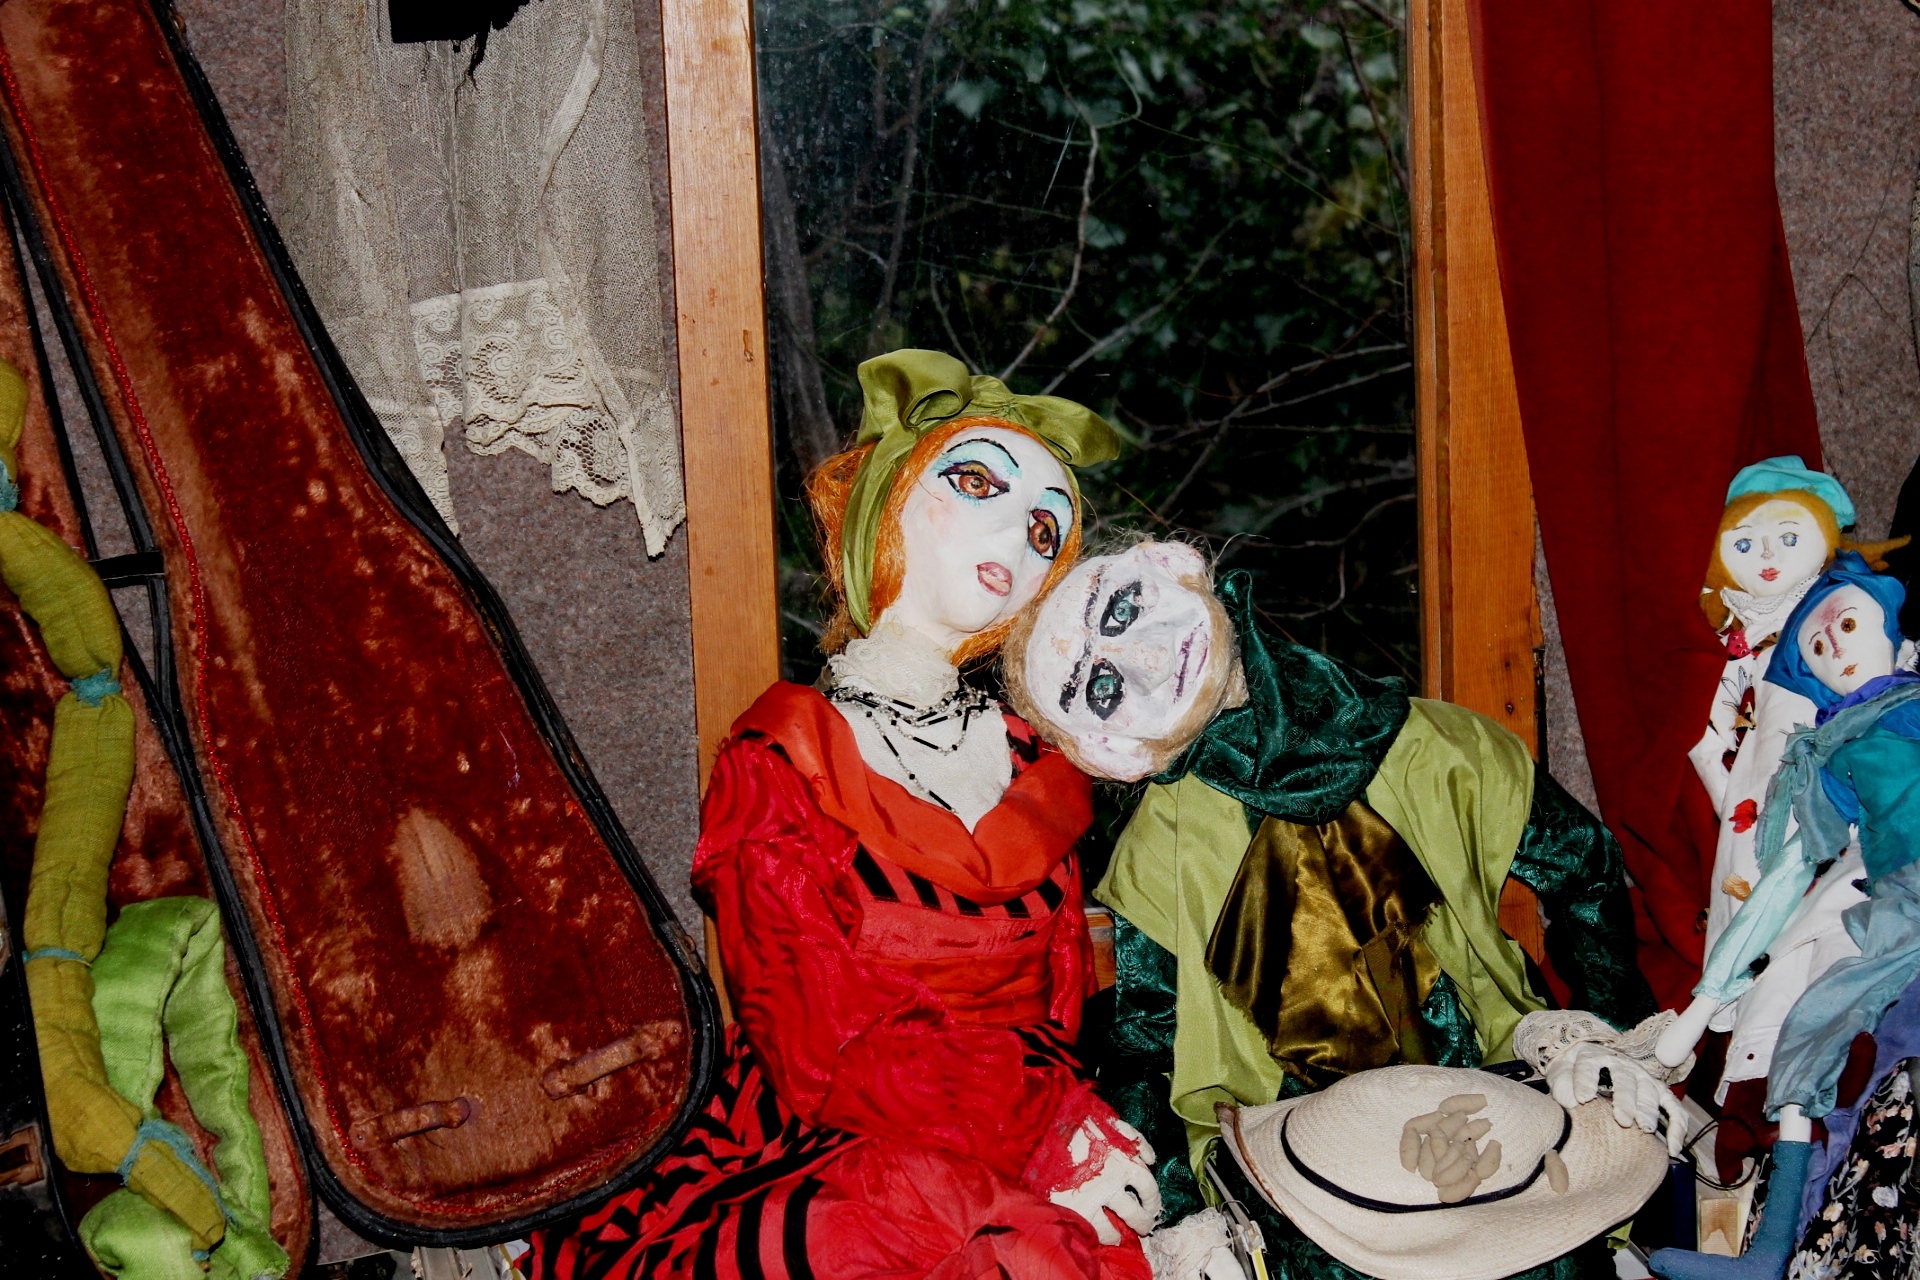 Puppets were made by Ilona Németh, former Orfeo-member